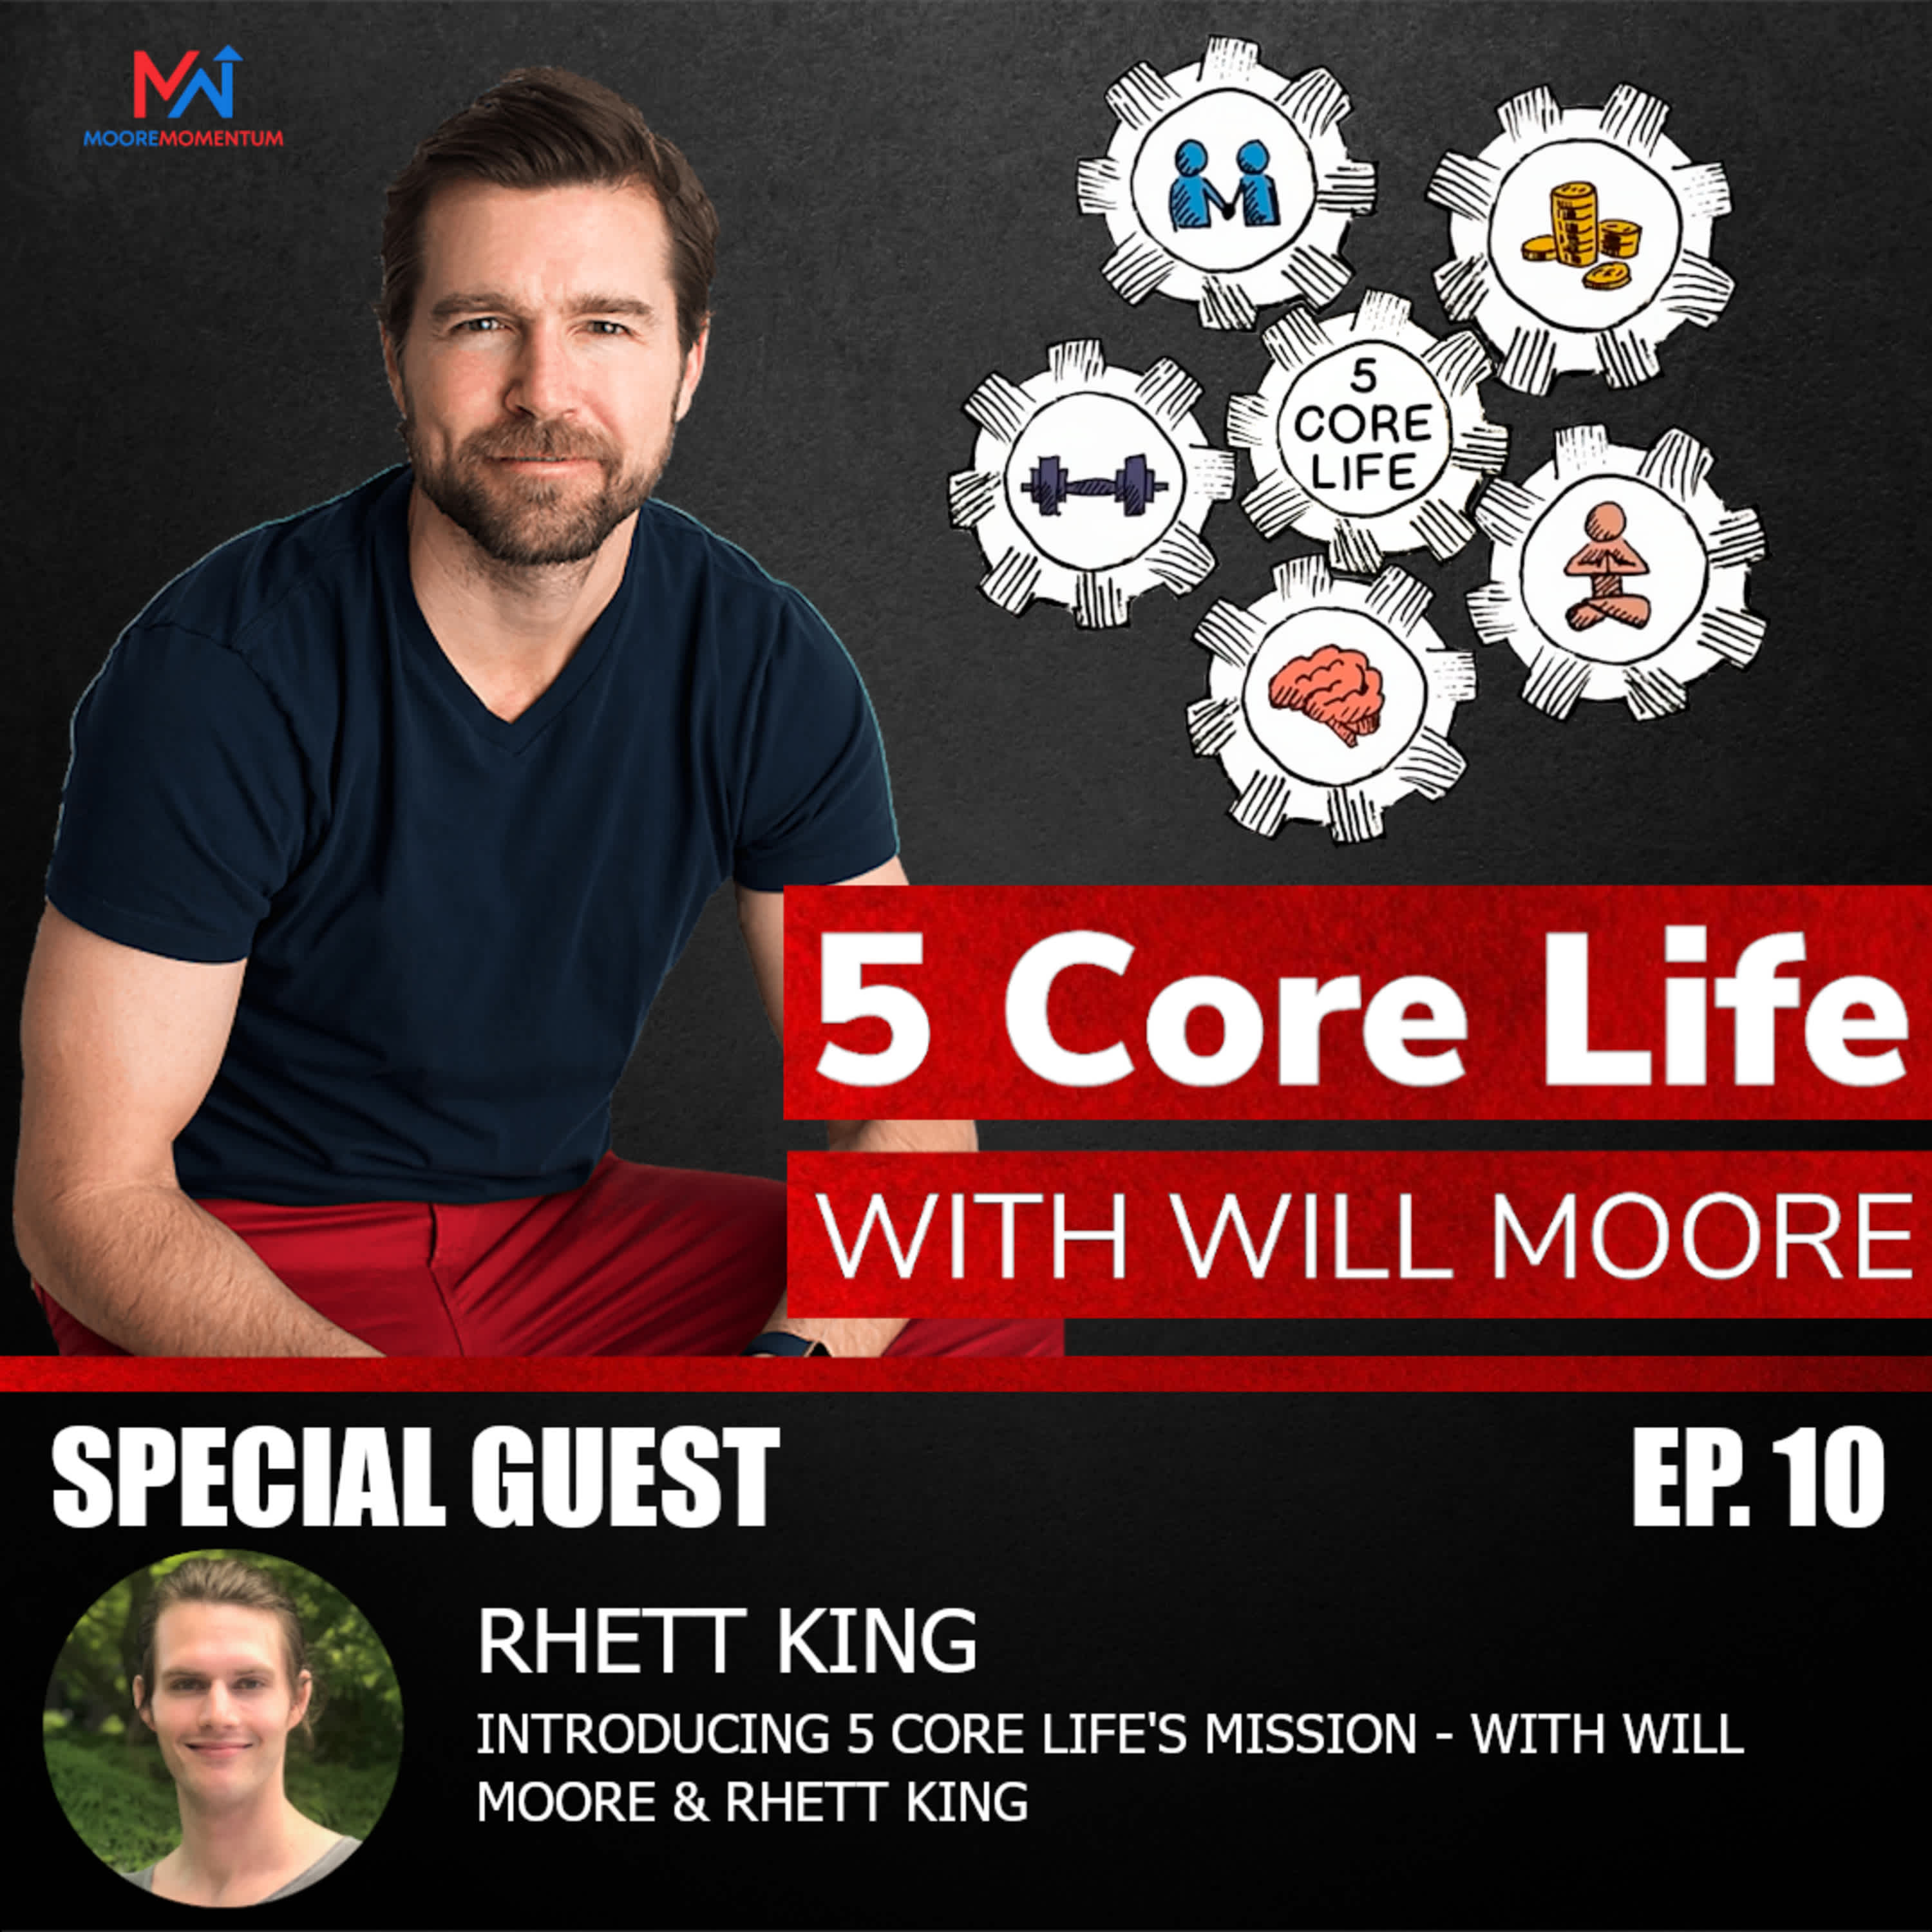 Introducing 5 Core Life's Mission - With Will Moore & Rhett King